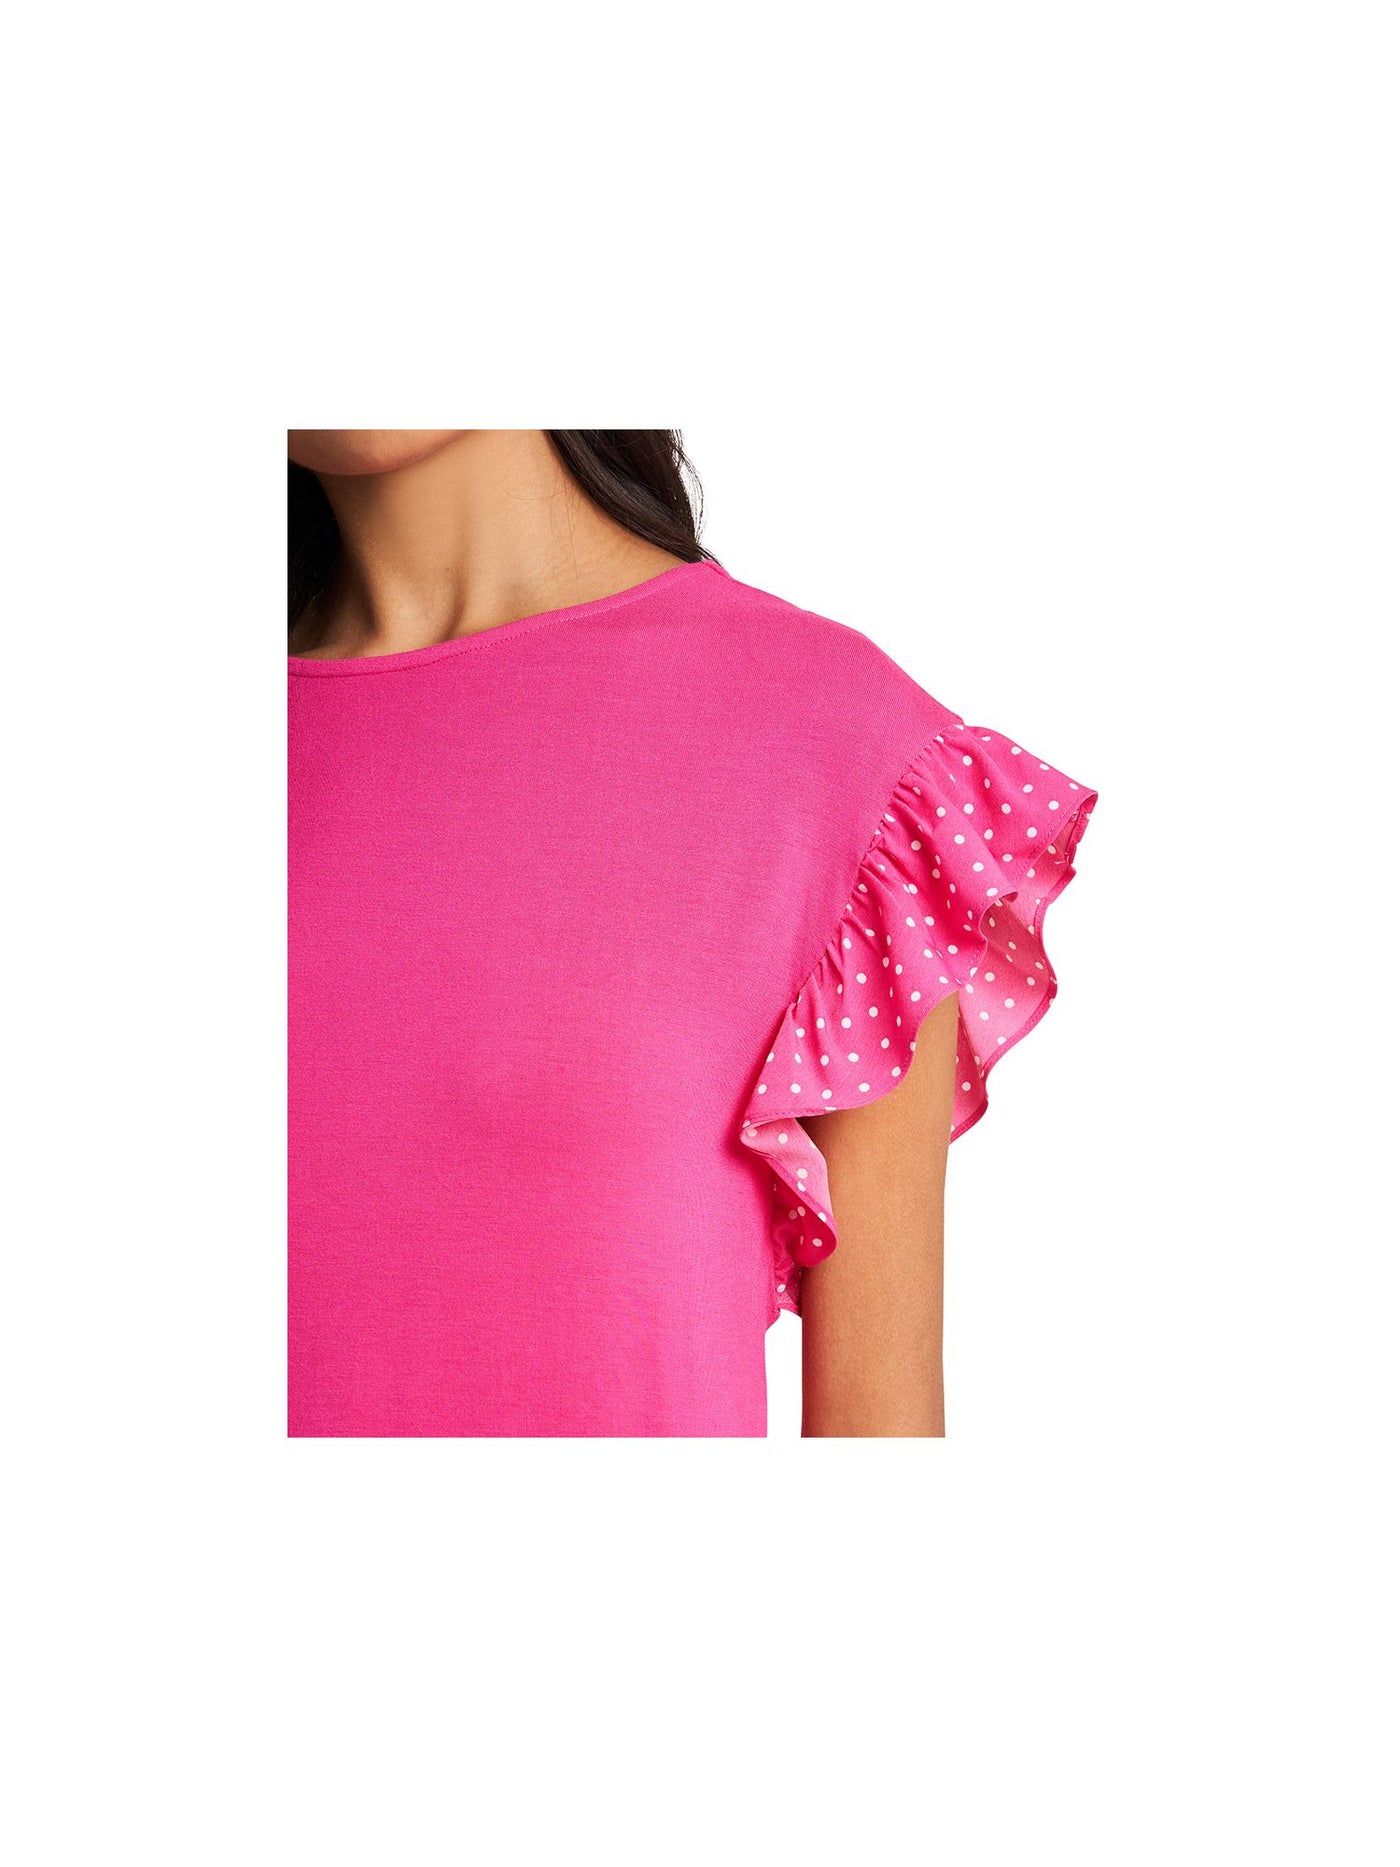 RILEY&RAE Womens Pink Stretch Ruffled Flutter Sleeve Crew Neck Wear To Work Top XS